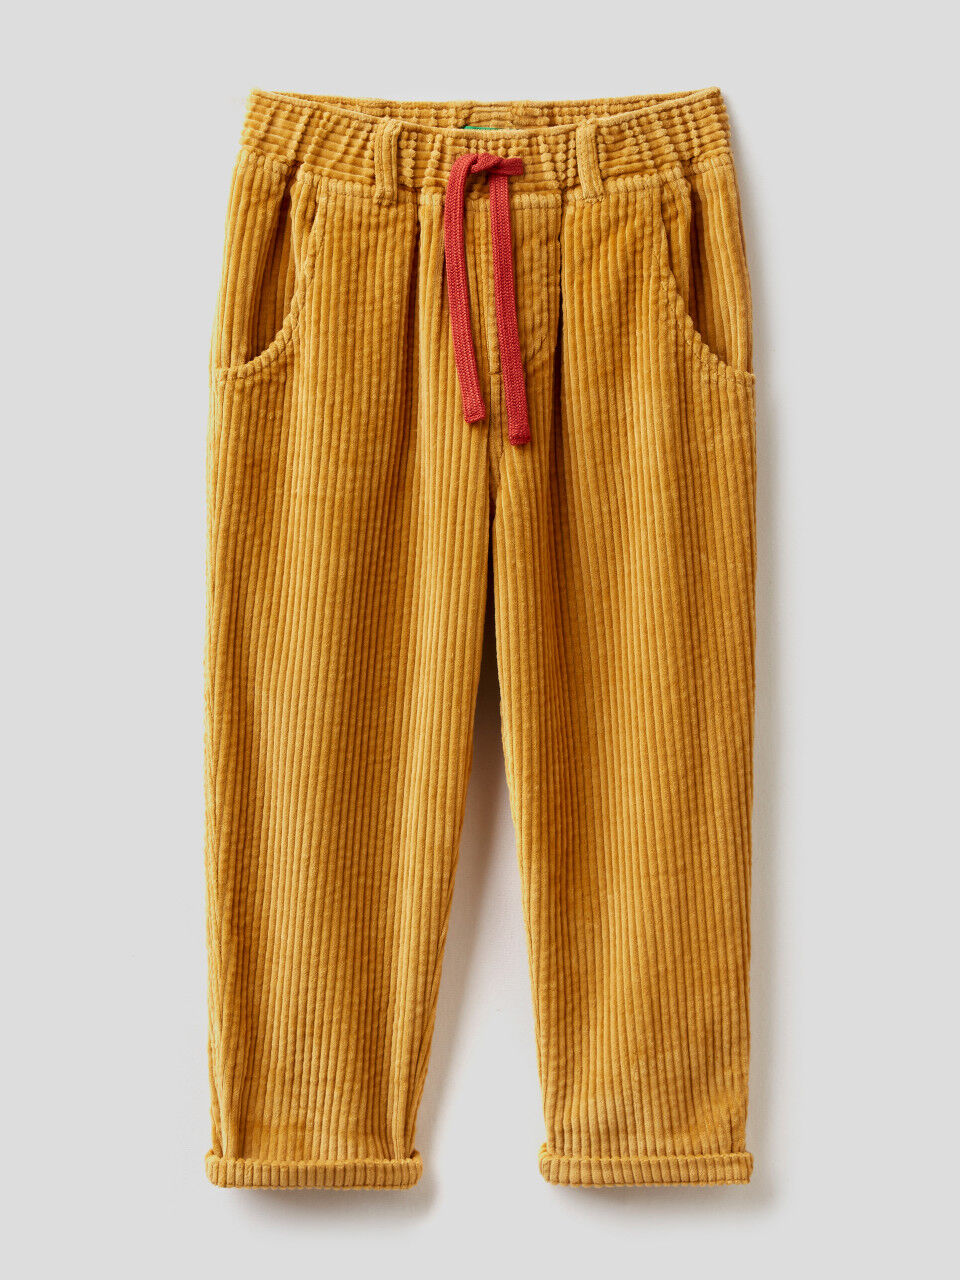 Trousers in corduroy